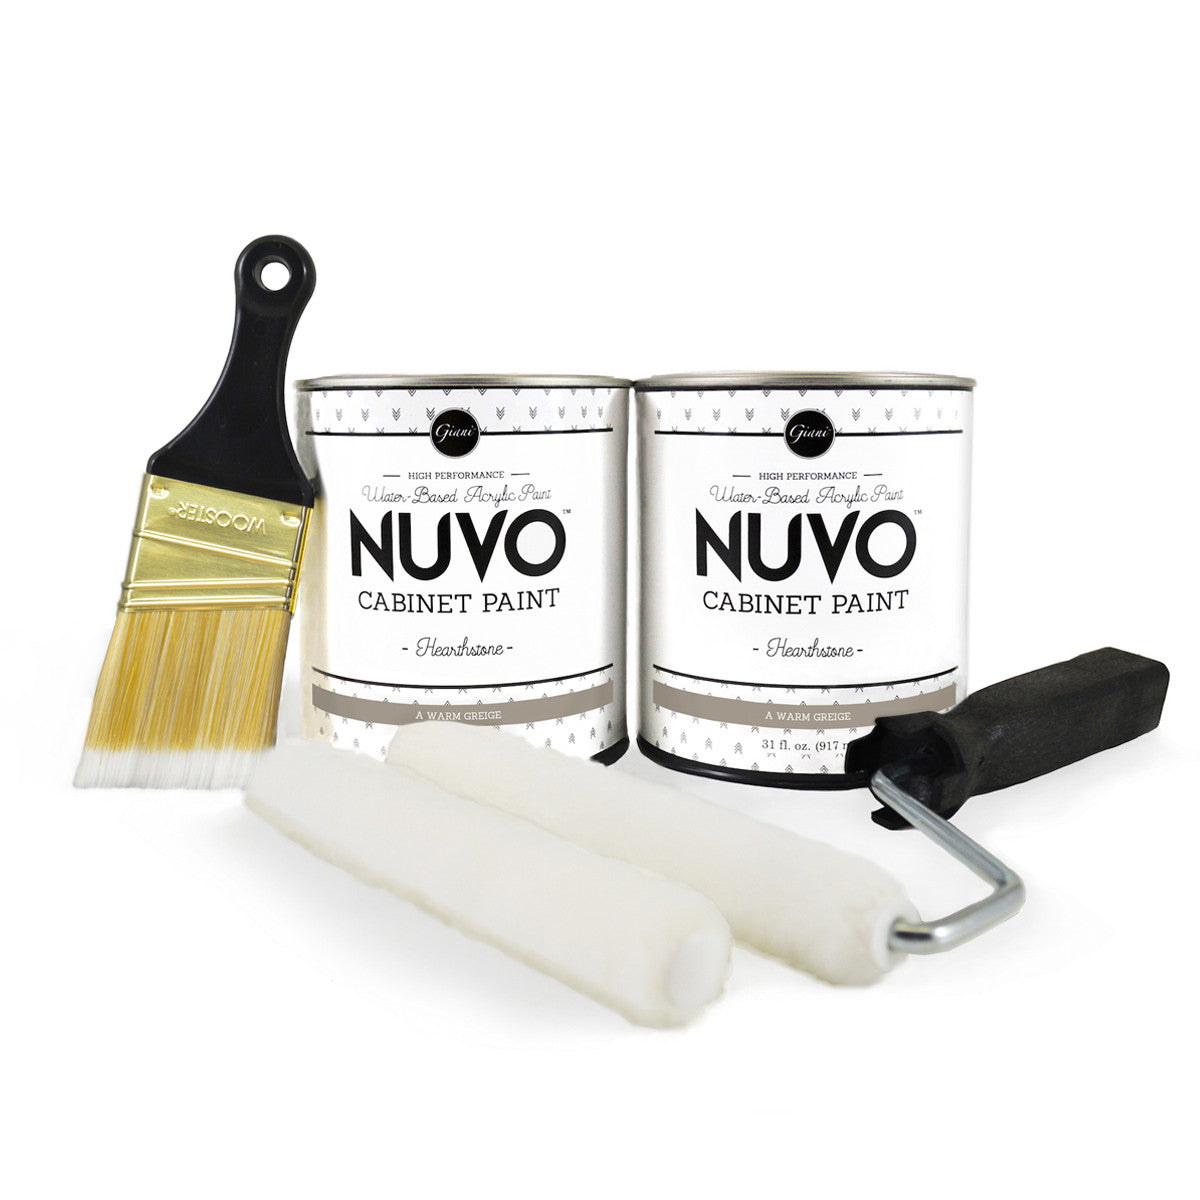 Nuvo Hearthstone Cabinet Paint Kit